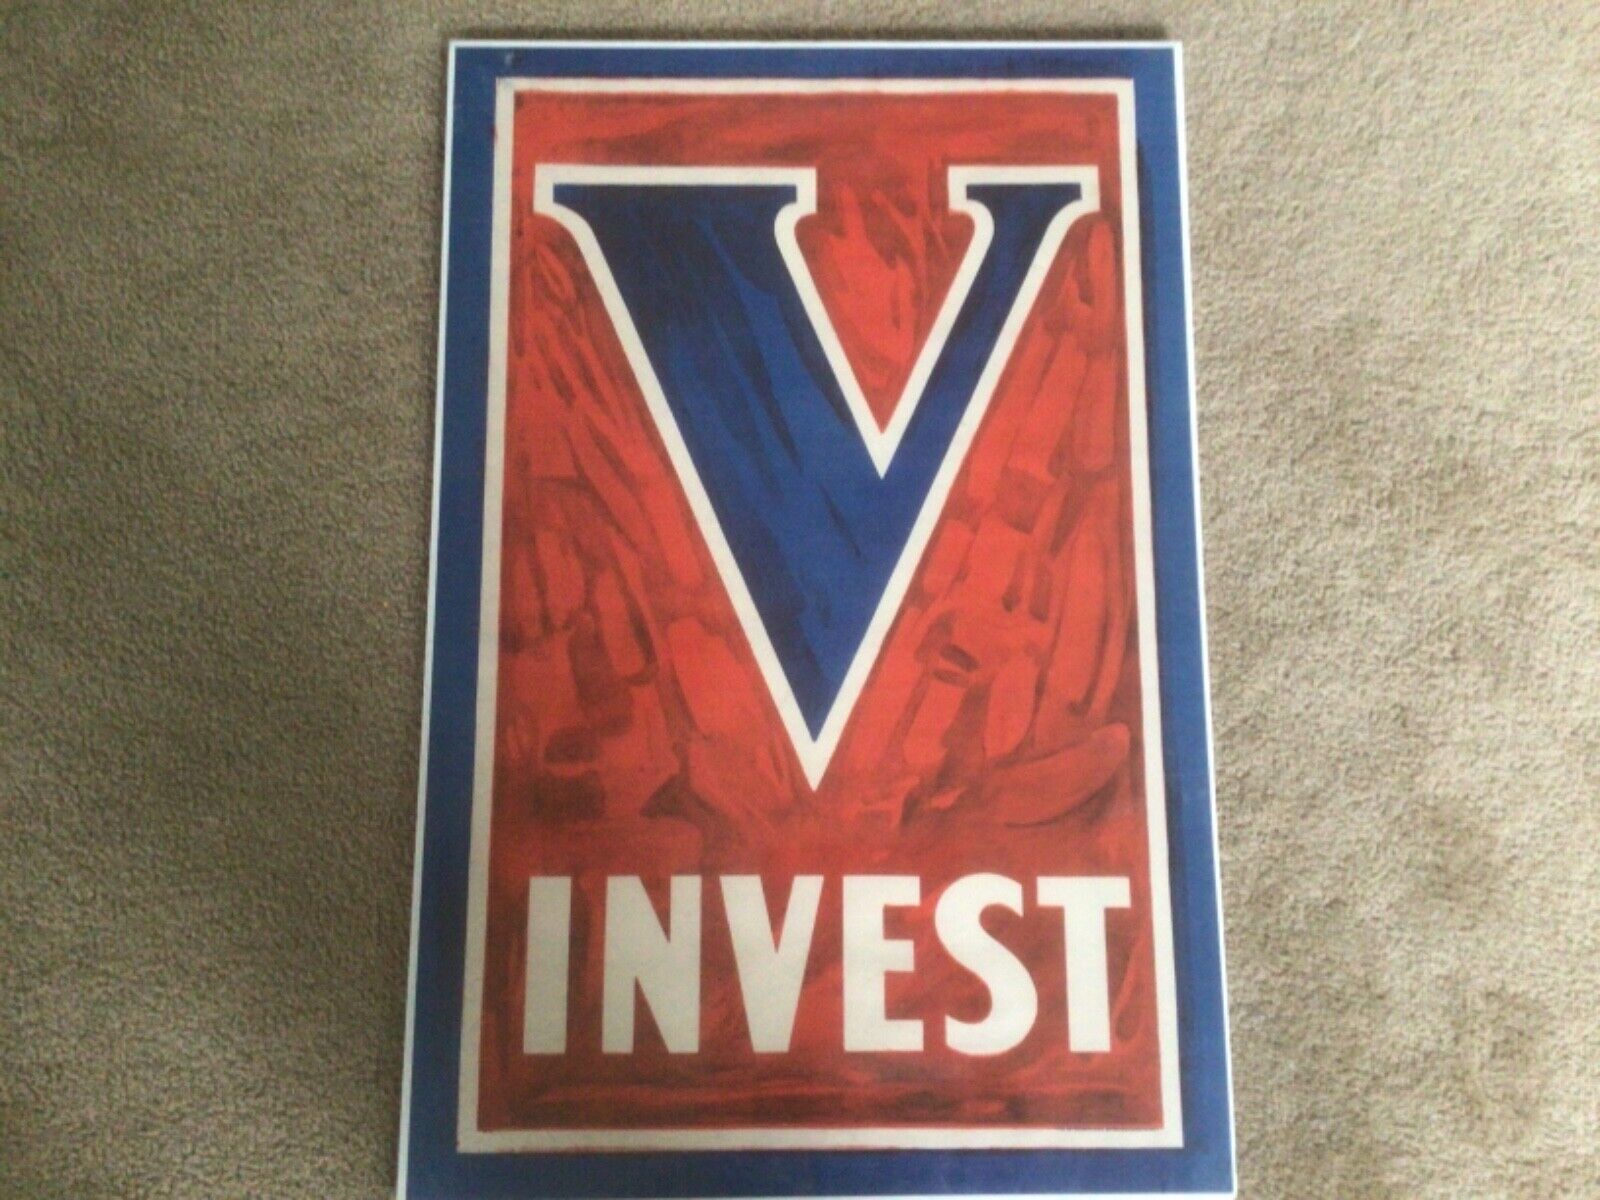 c.1918 V INVEST WWI Poster Victory Liberty Loan Original World War One WW1